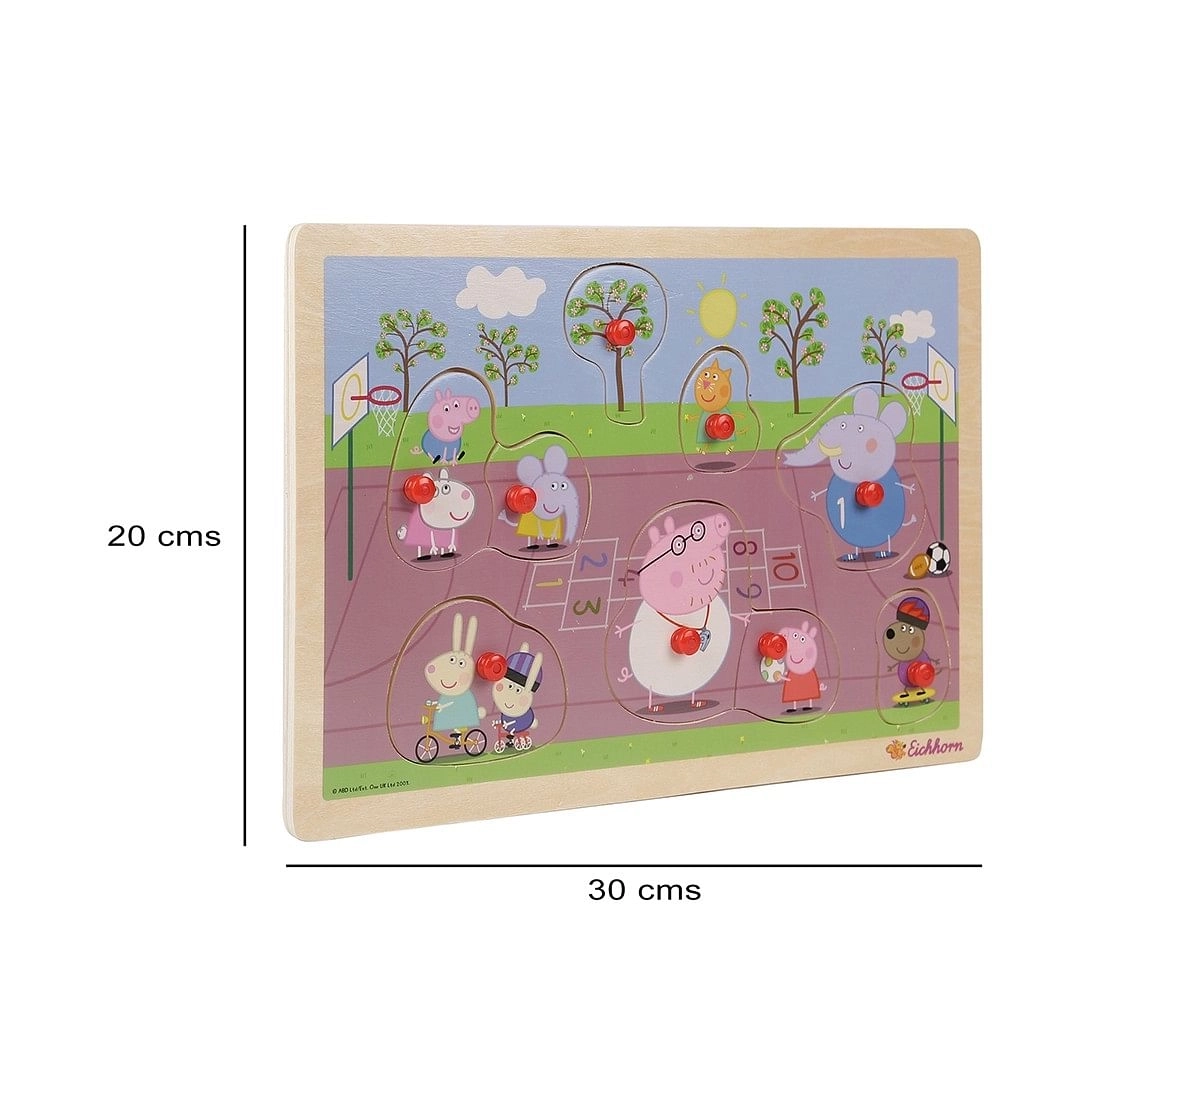 Peppa Pig Pin Puzzle Assorted Wooden Toys for Kids age 2Y+ 